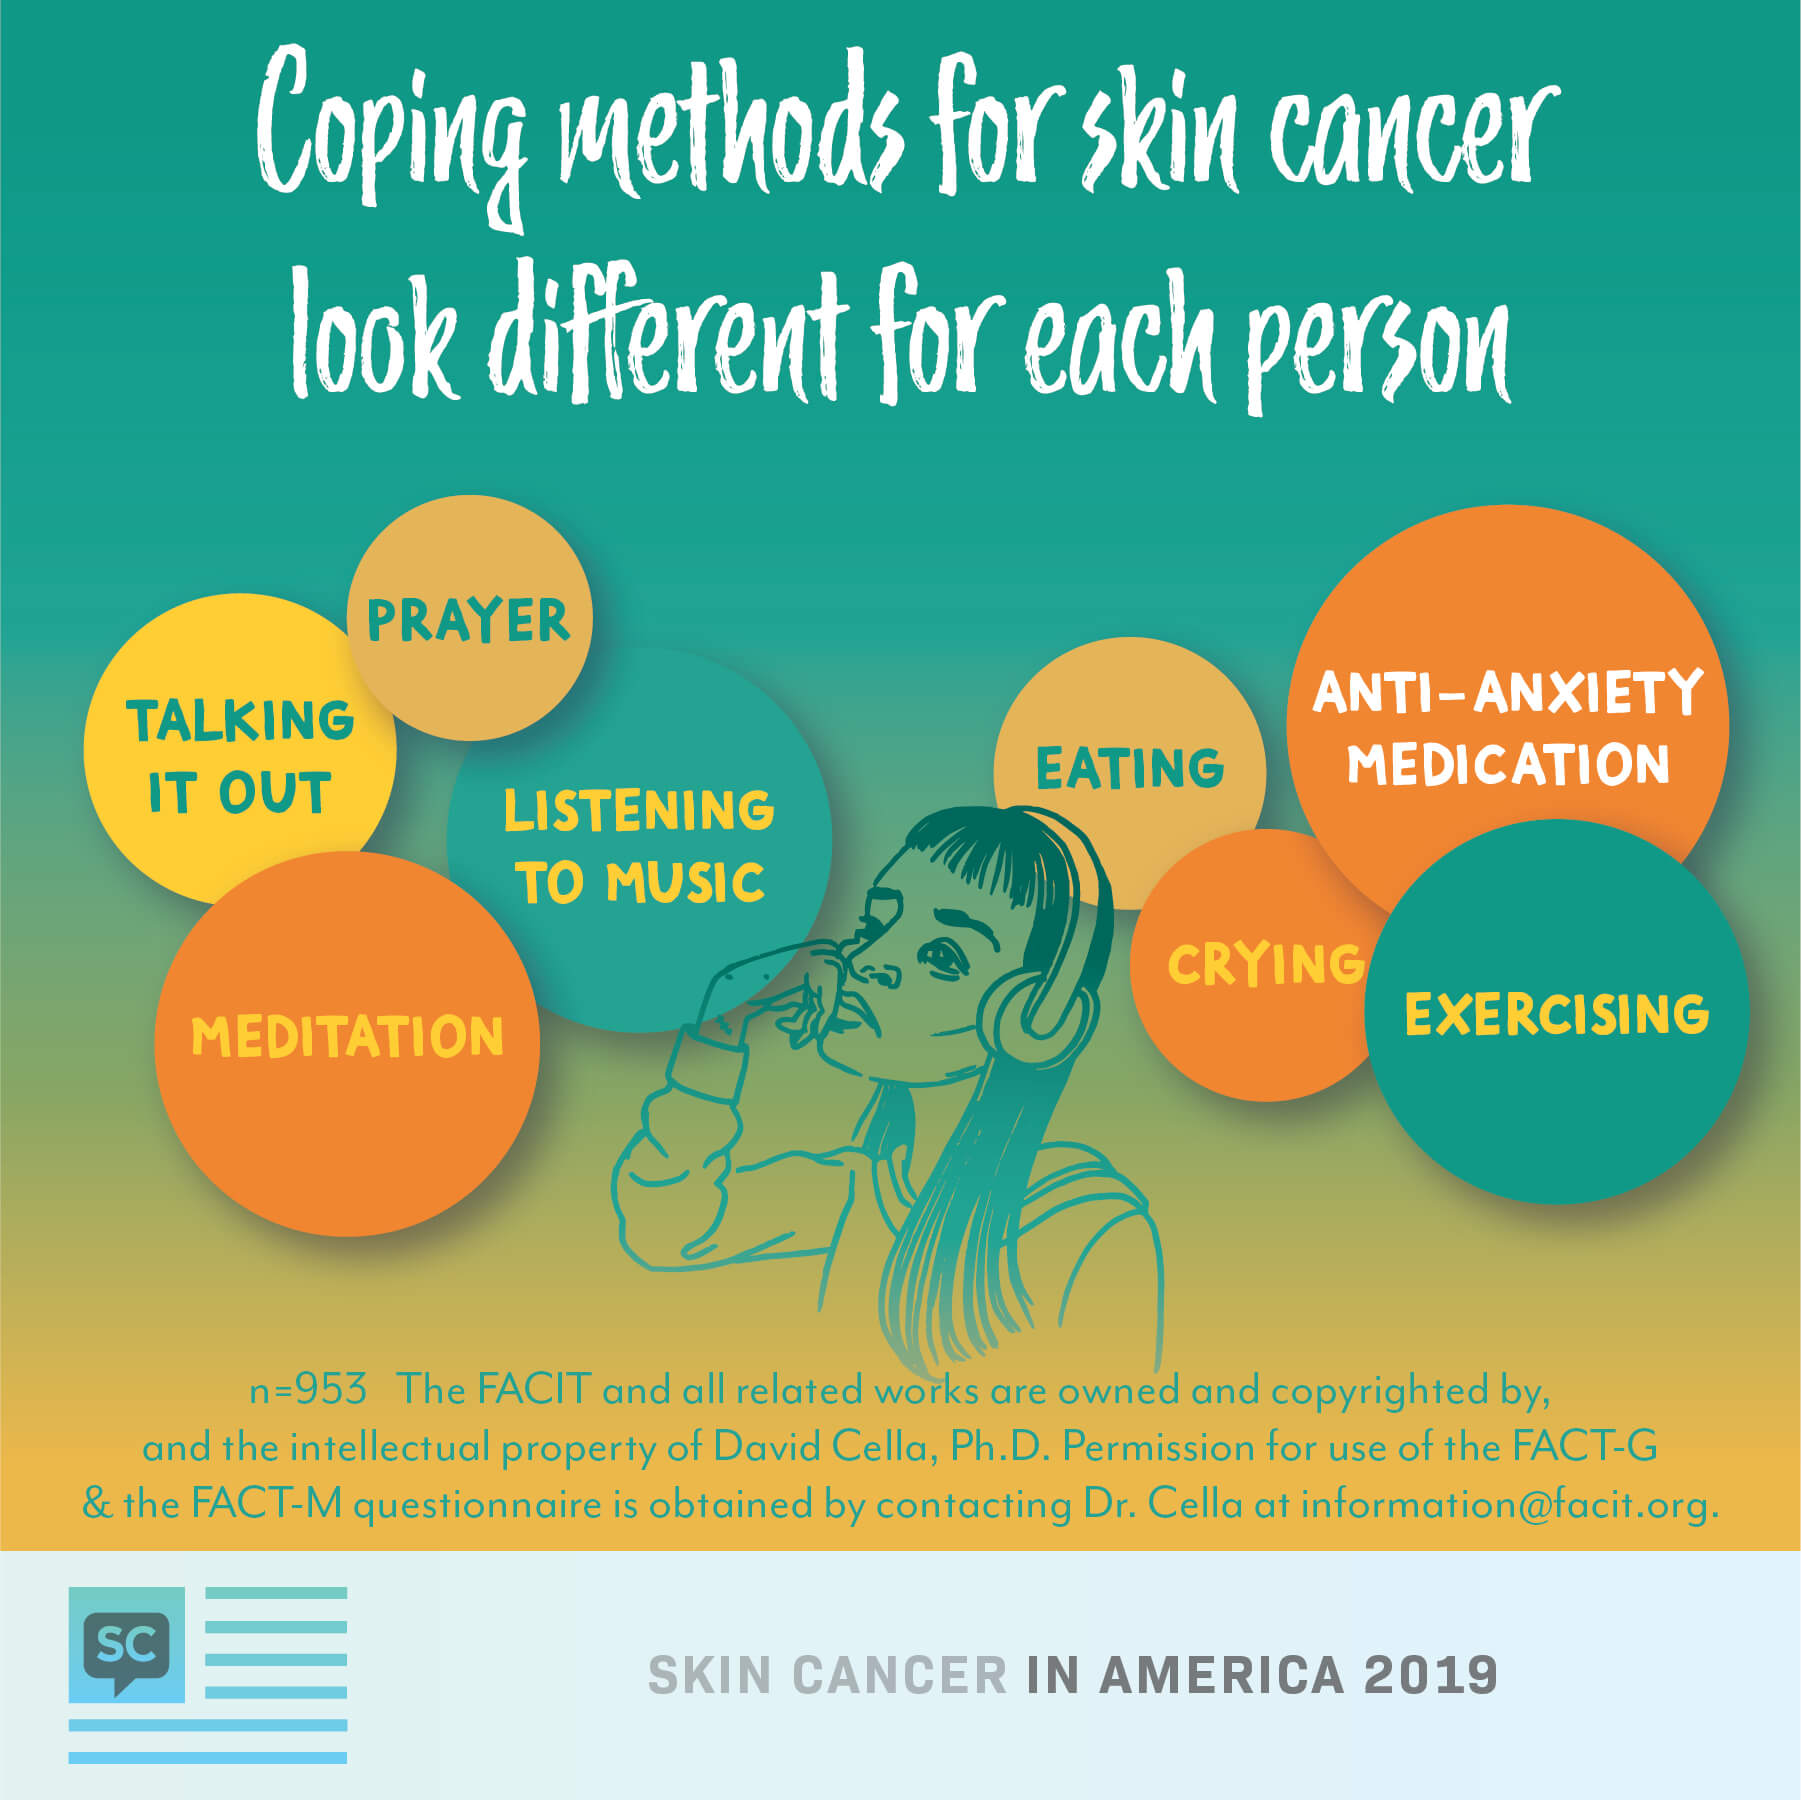 Coping methods for skin cancer included: talking it out, meditation, music, eating, prayer, crying, exercise, anxiety meds